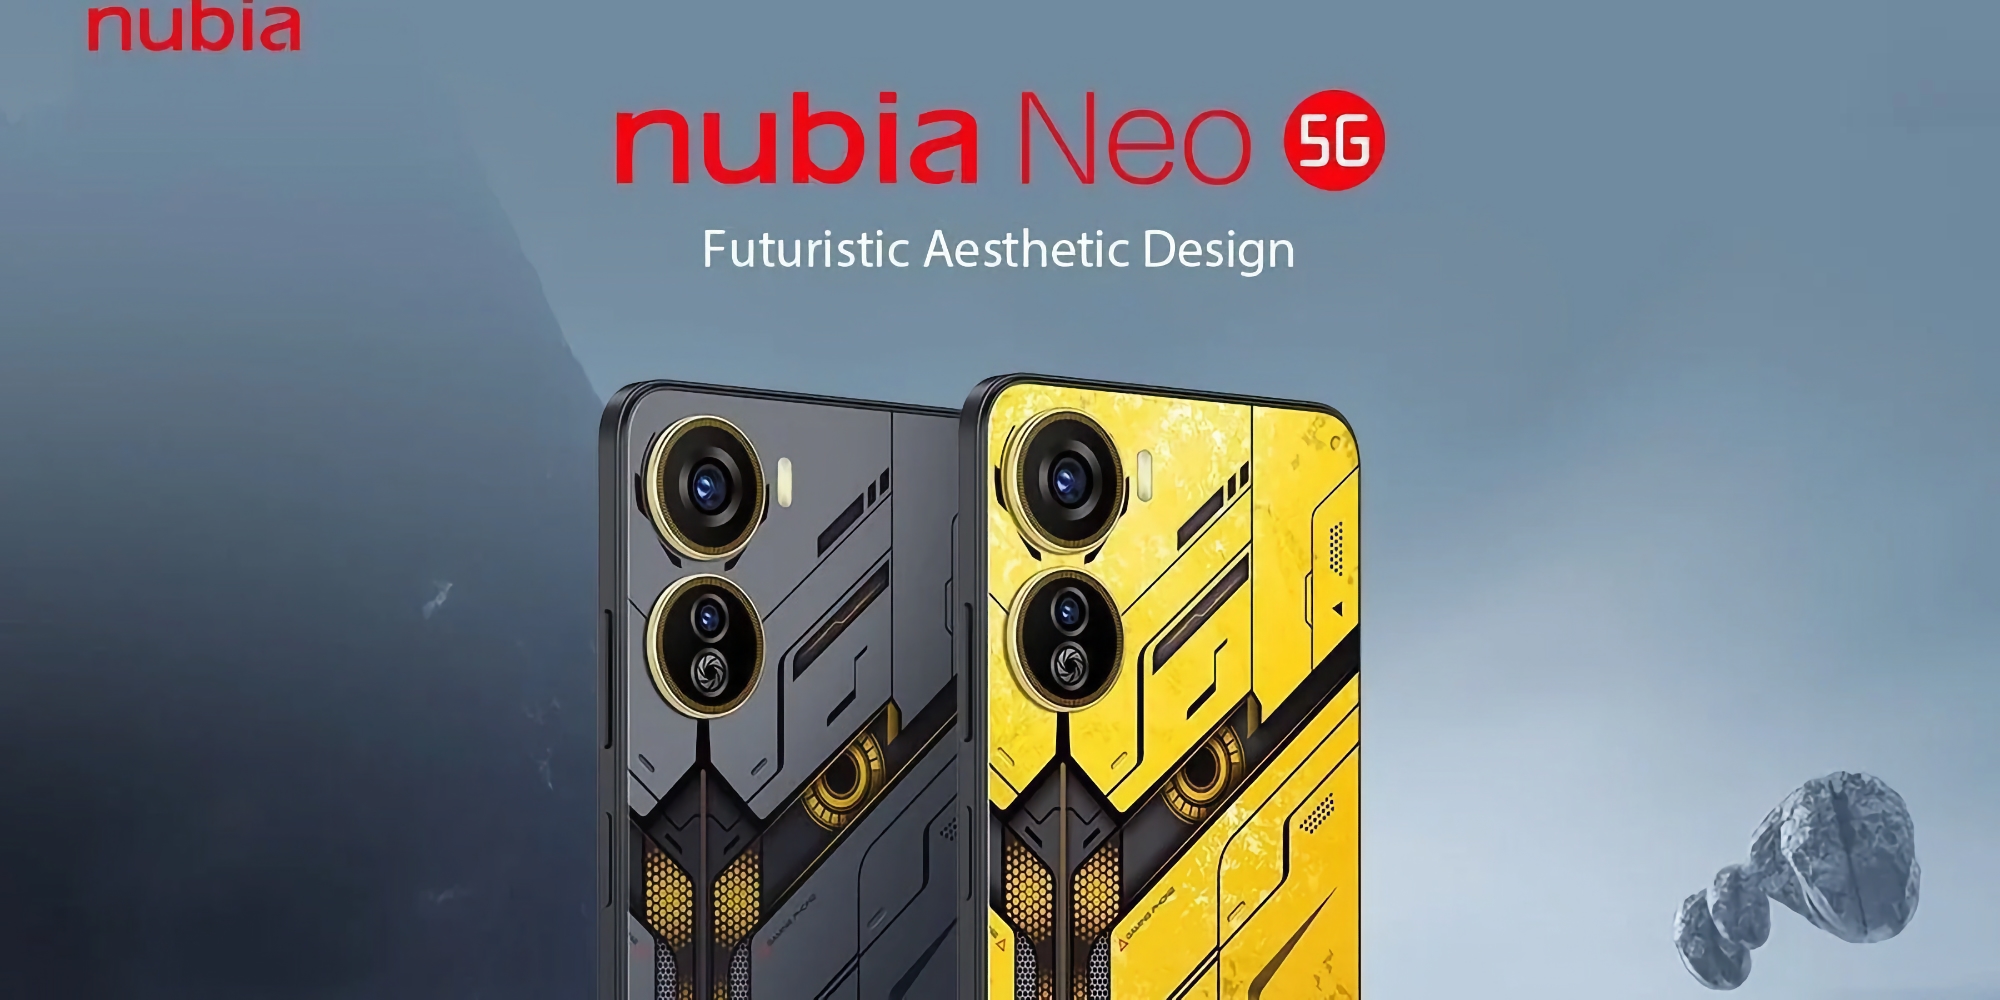 Nubia Neo 5G: gaming smartphone with 120Hz screen, Unisoc T820 chip, 4,500mAh battery and $199 price tag